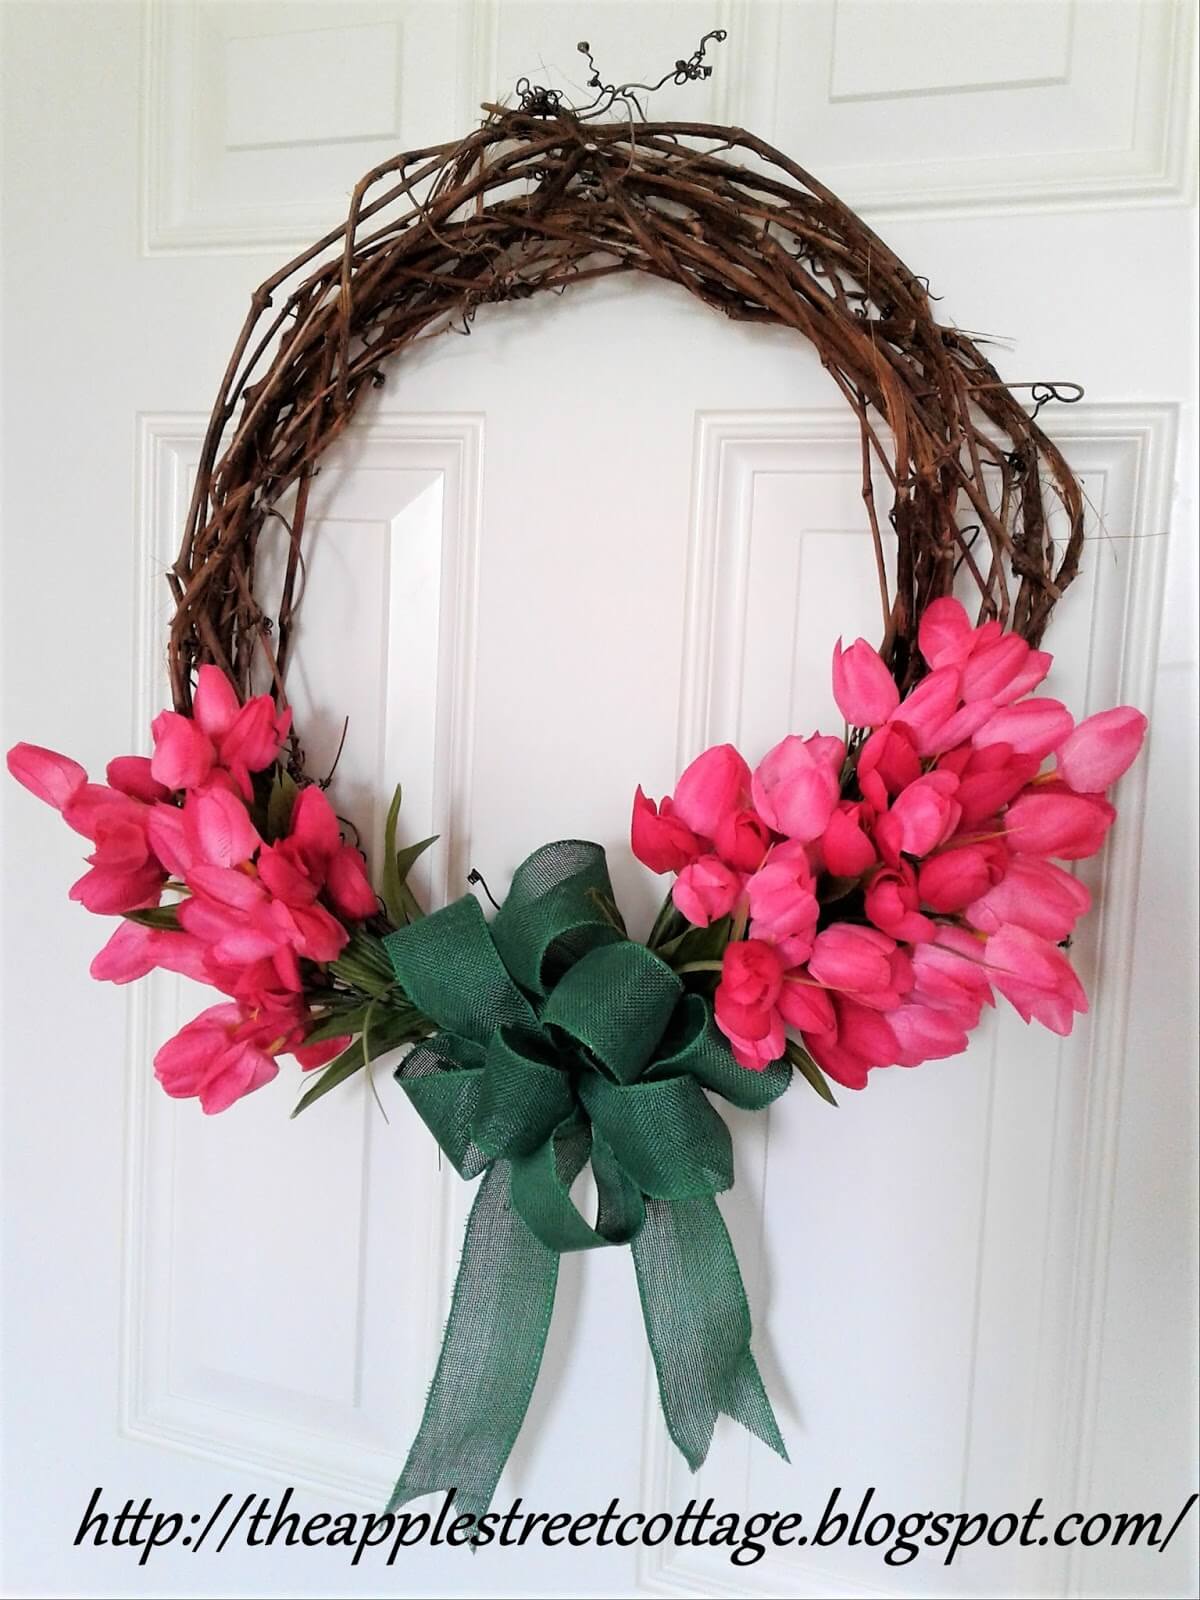 Grapevine Wreath with Pink Flowers and coordinating bow